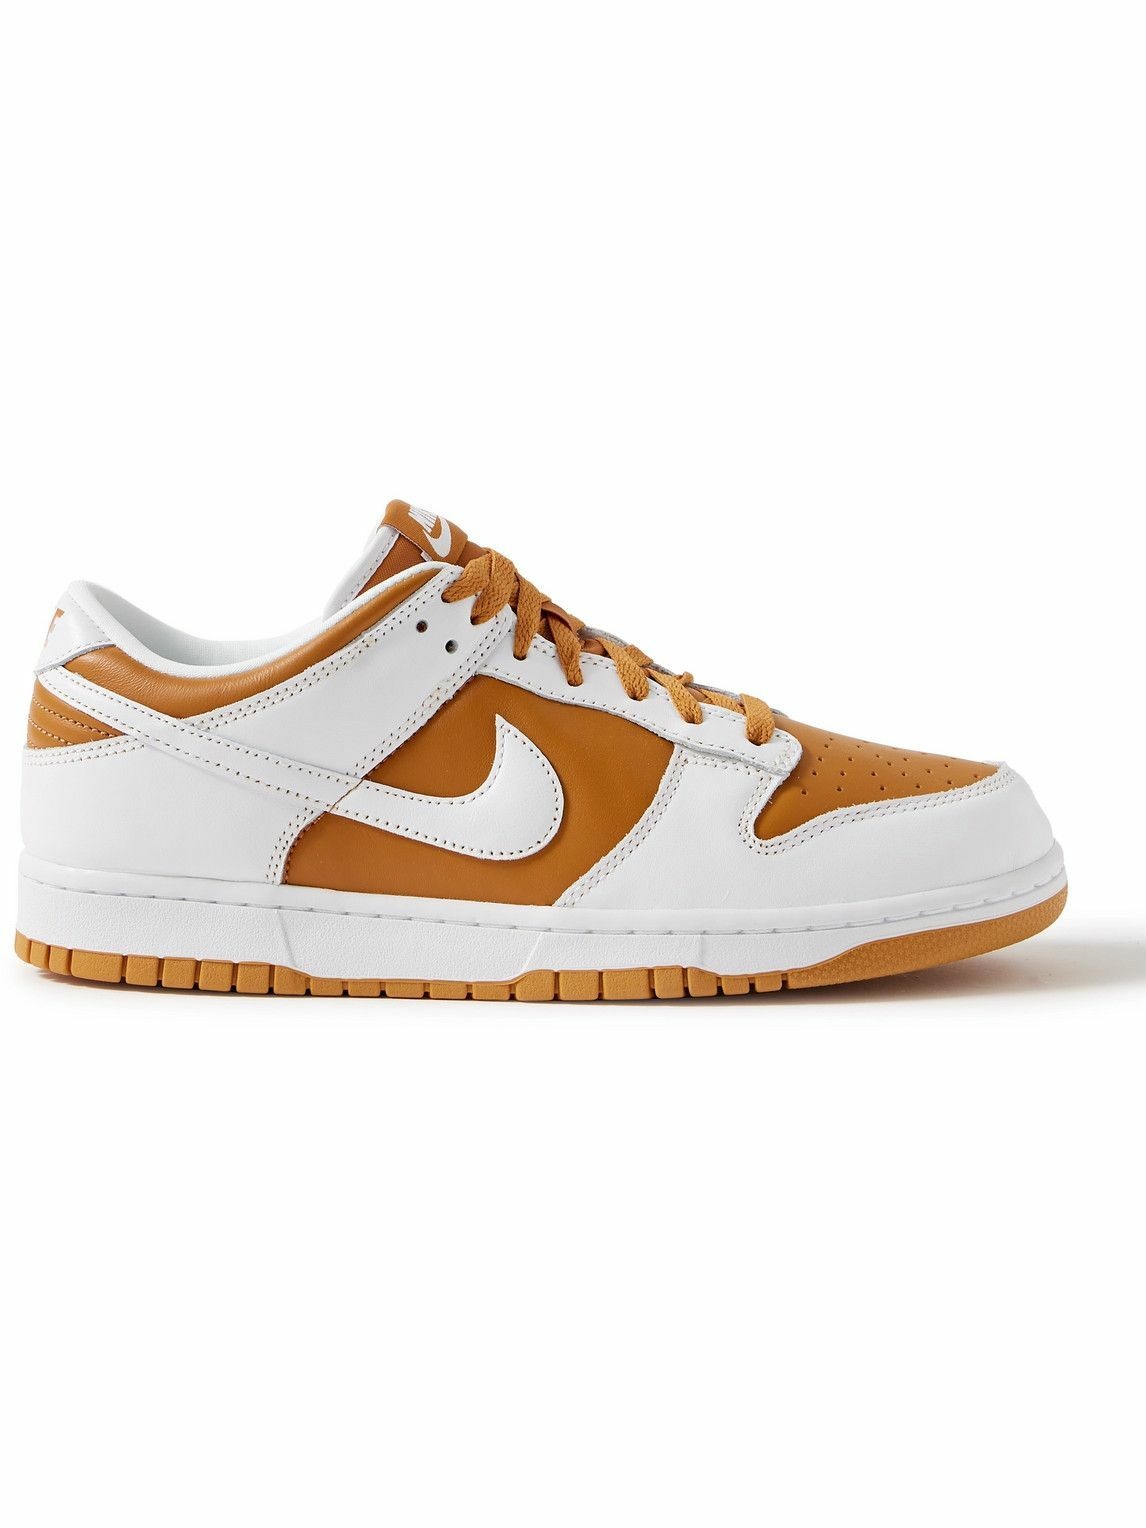 Nike - Dunk Low QS Leather Sneakers - White Nike